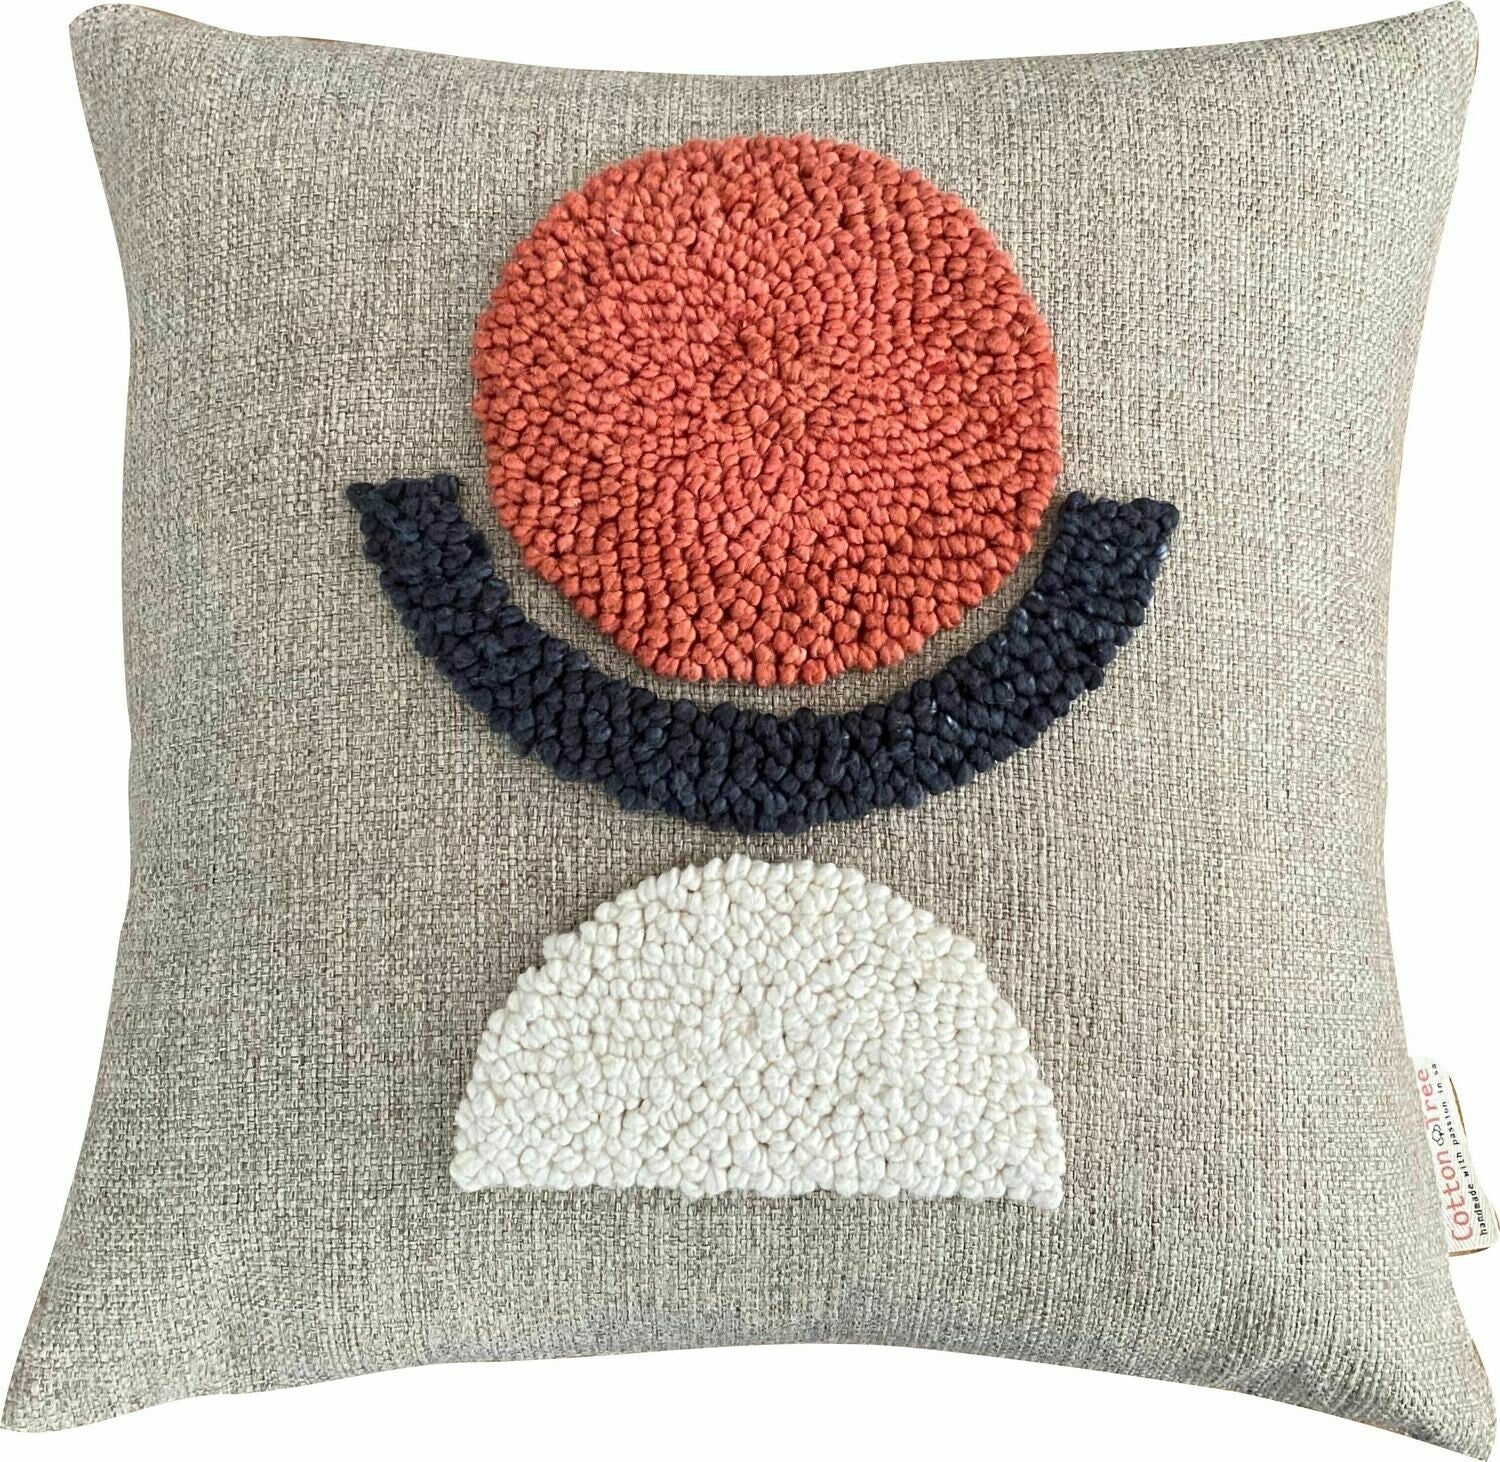 Scatter_Cushion_Punchneedle_Appilque_Scandi_African_Charcoal_natural__Rust_Linen